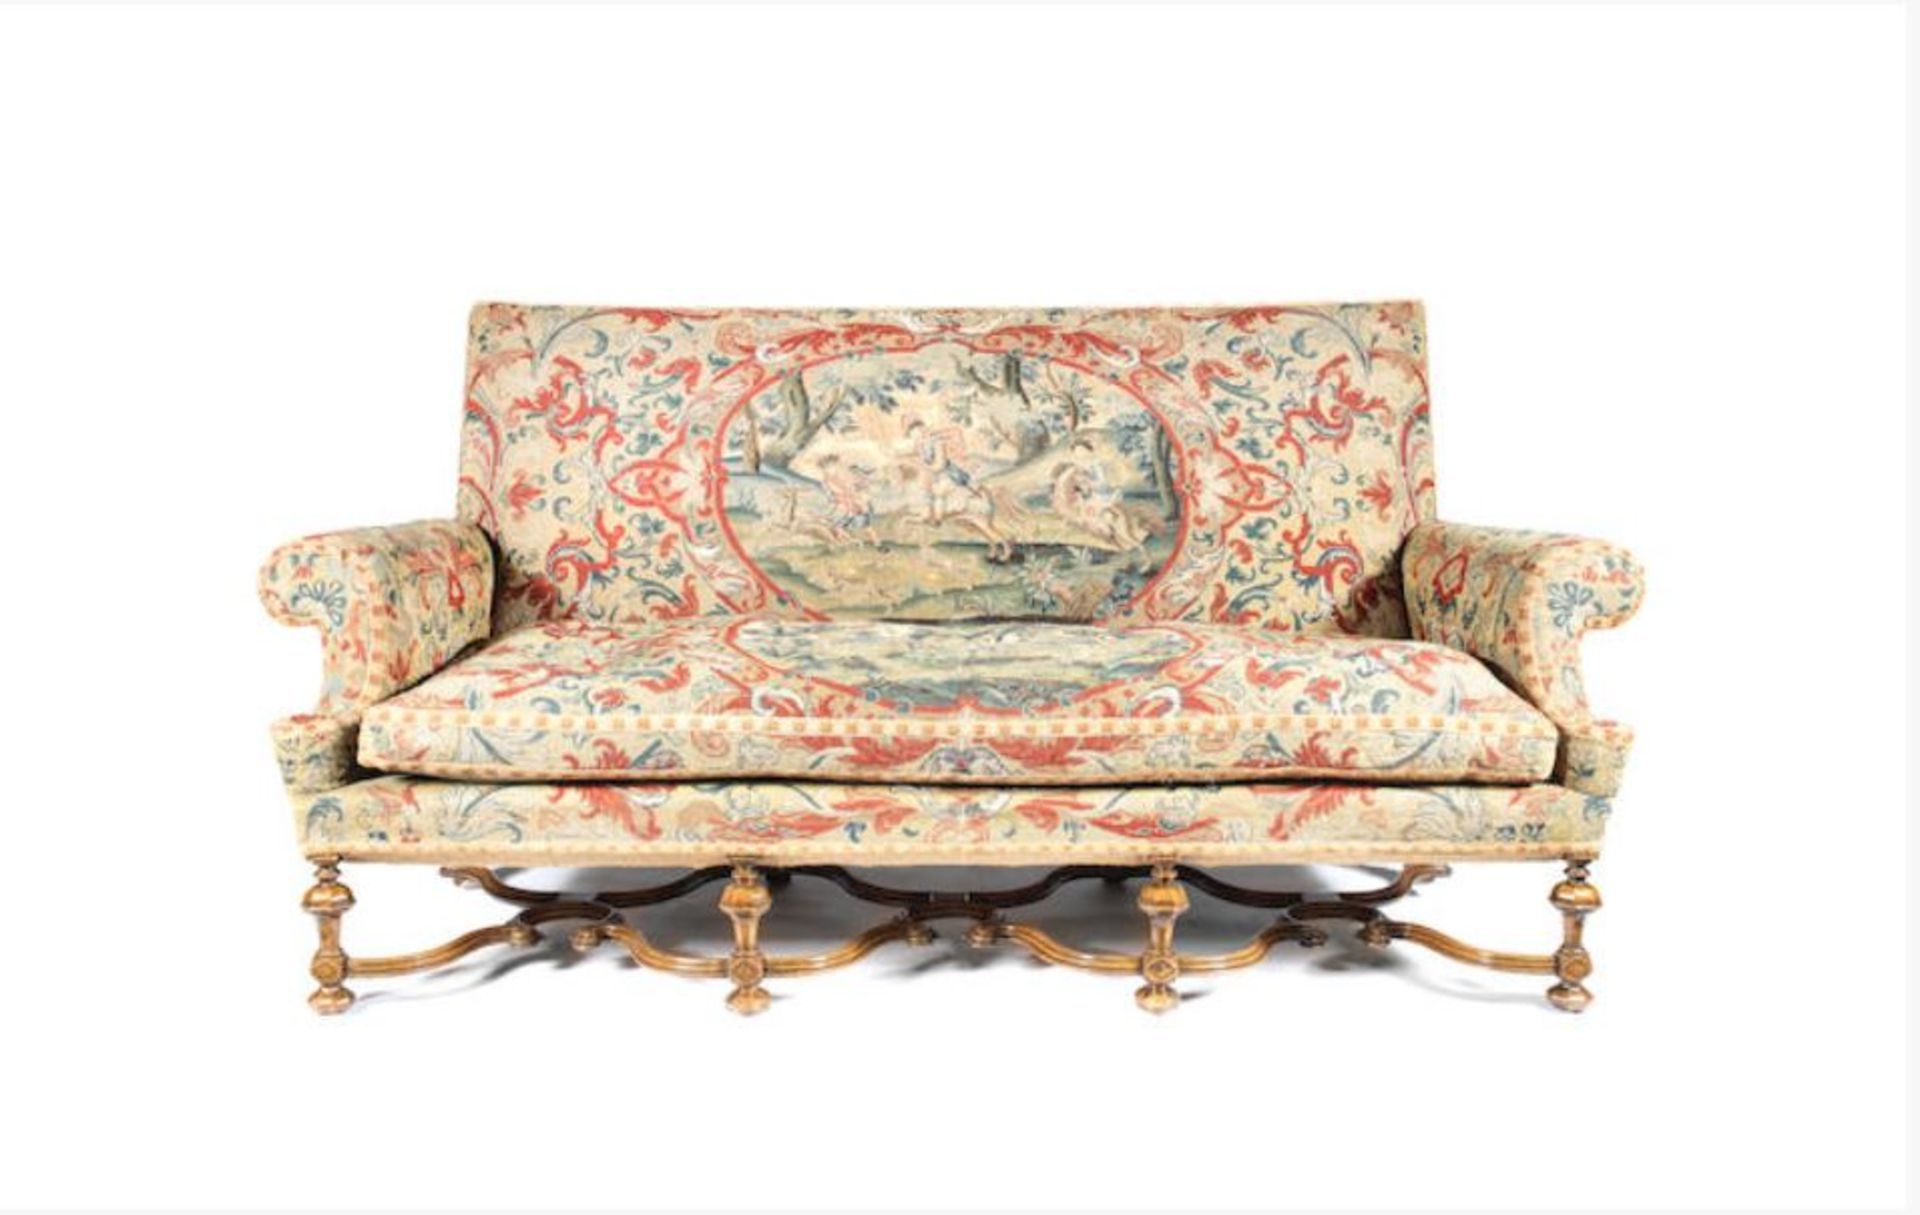 A late Victorian or Edwardian walnut sofa 1900-1910, in the William and Mary style